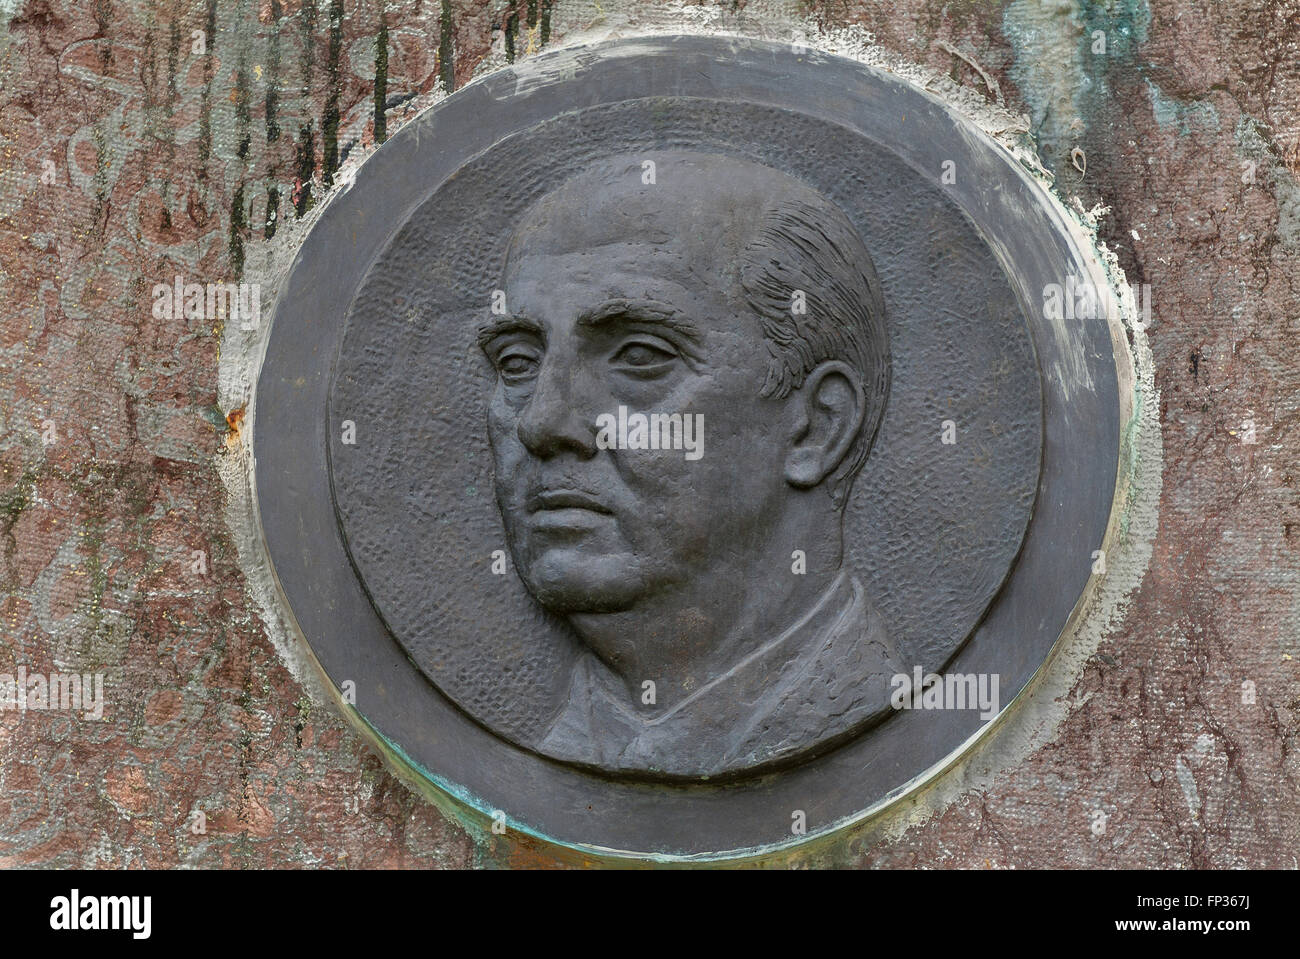 Portrait of the dictator Francisco Franco, details on the Franco monument from 1975, removed in 2015, Spanish square, Oviedo Stock Photo